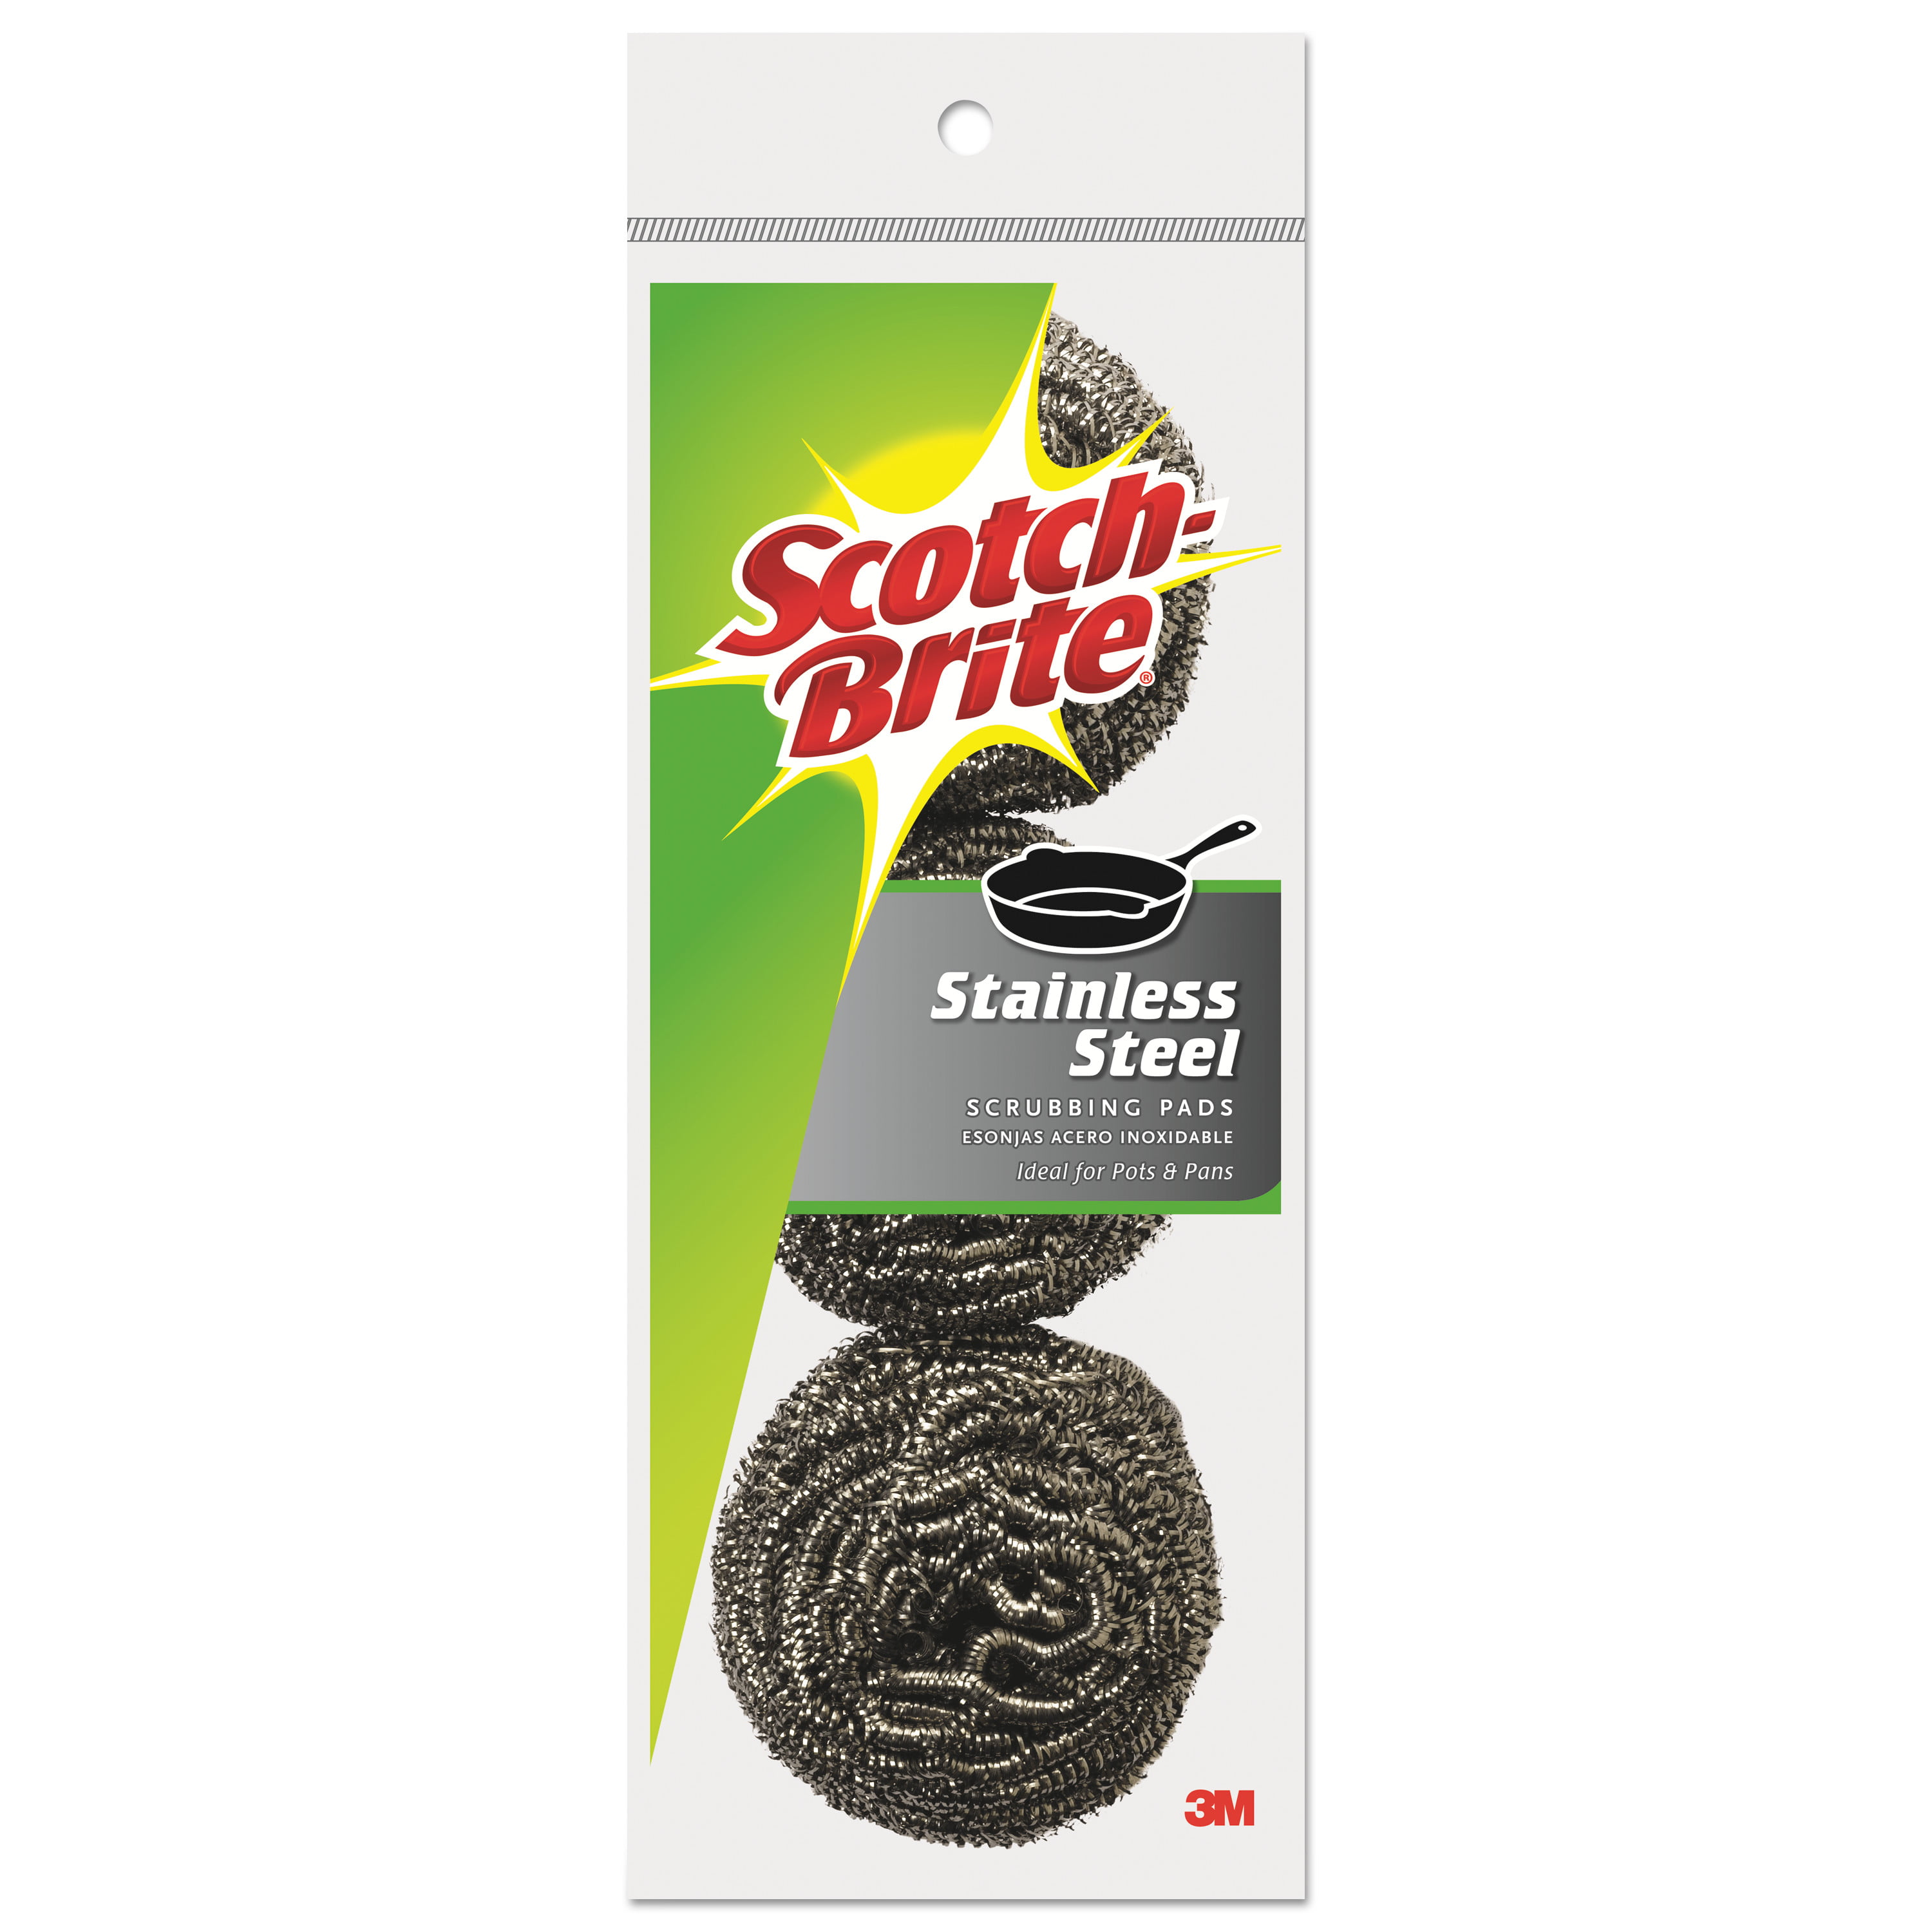 Household Cleaning Supplies M Scotch Brite Stainless Steel Scouring Pad Pads Piece Home